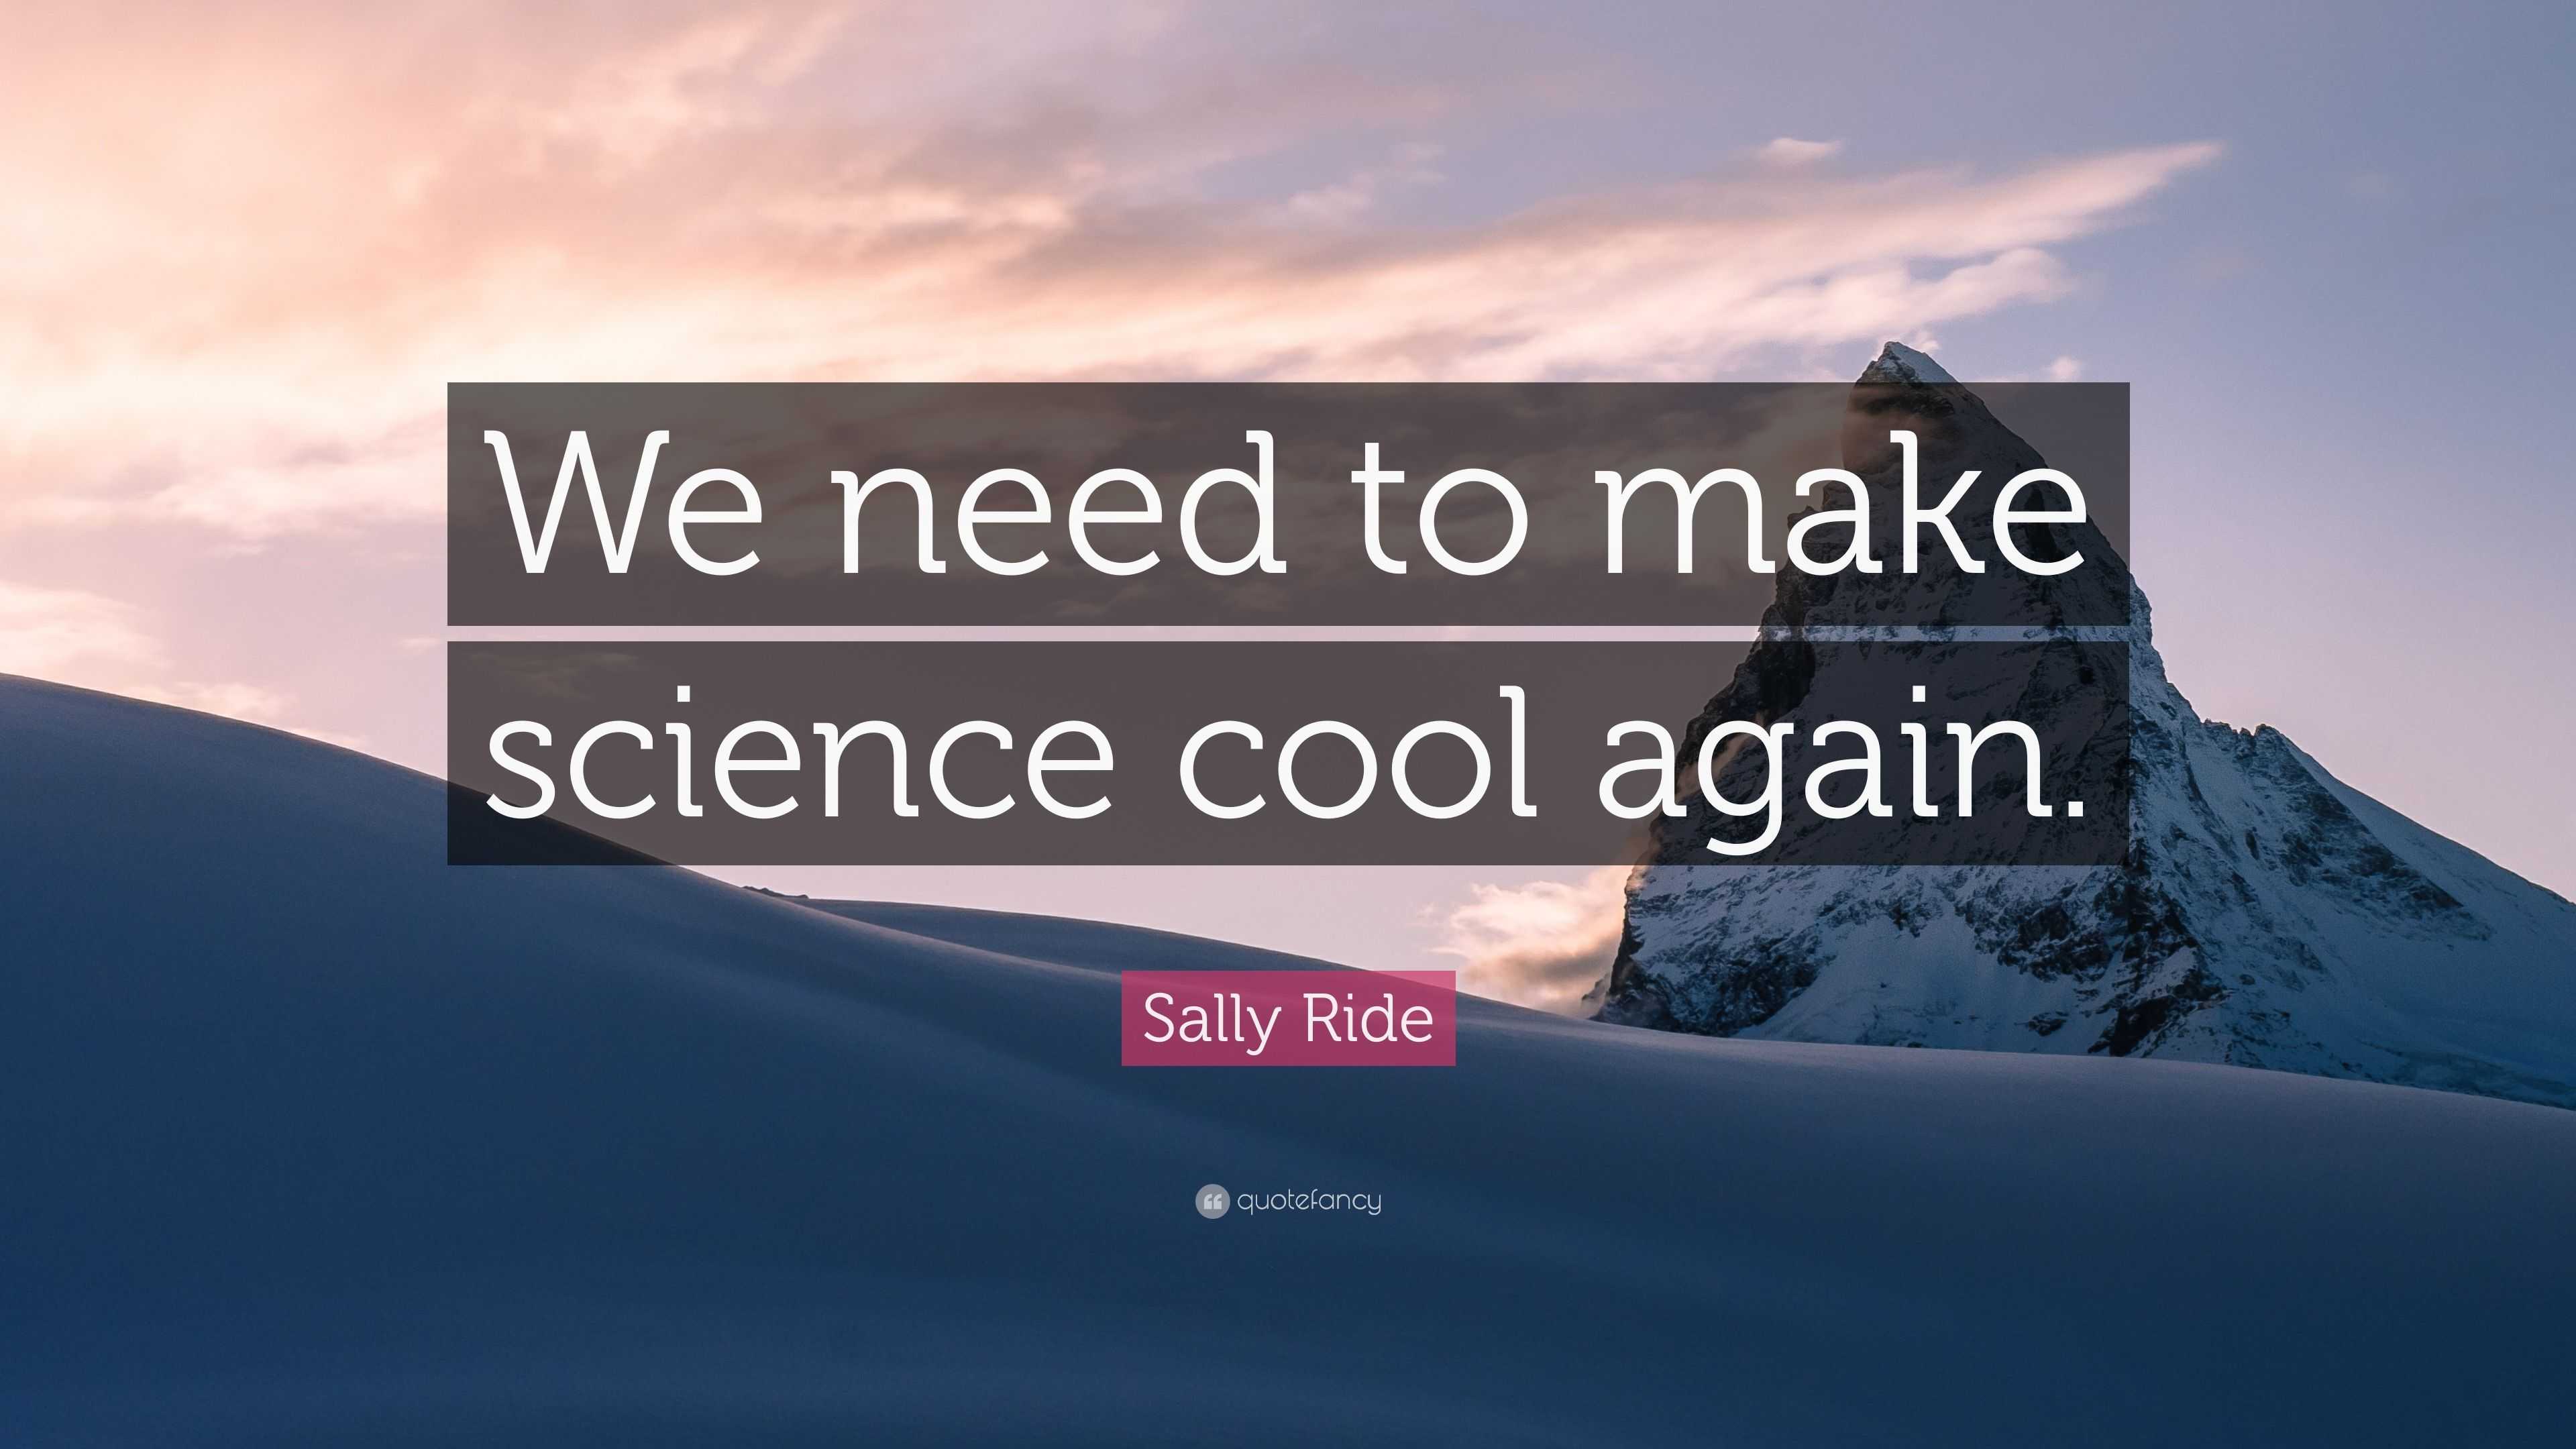 Sally Ride Quote: “We need to make